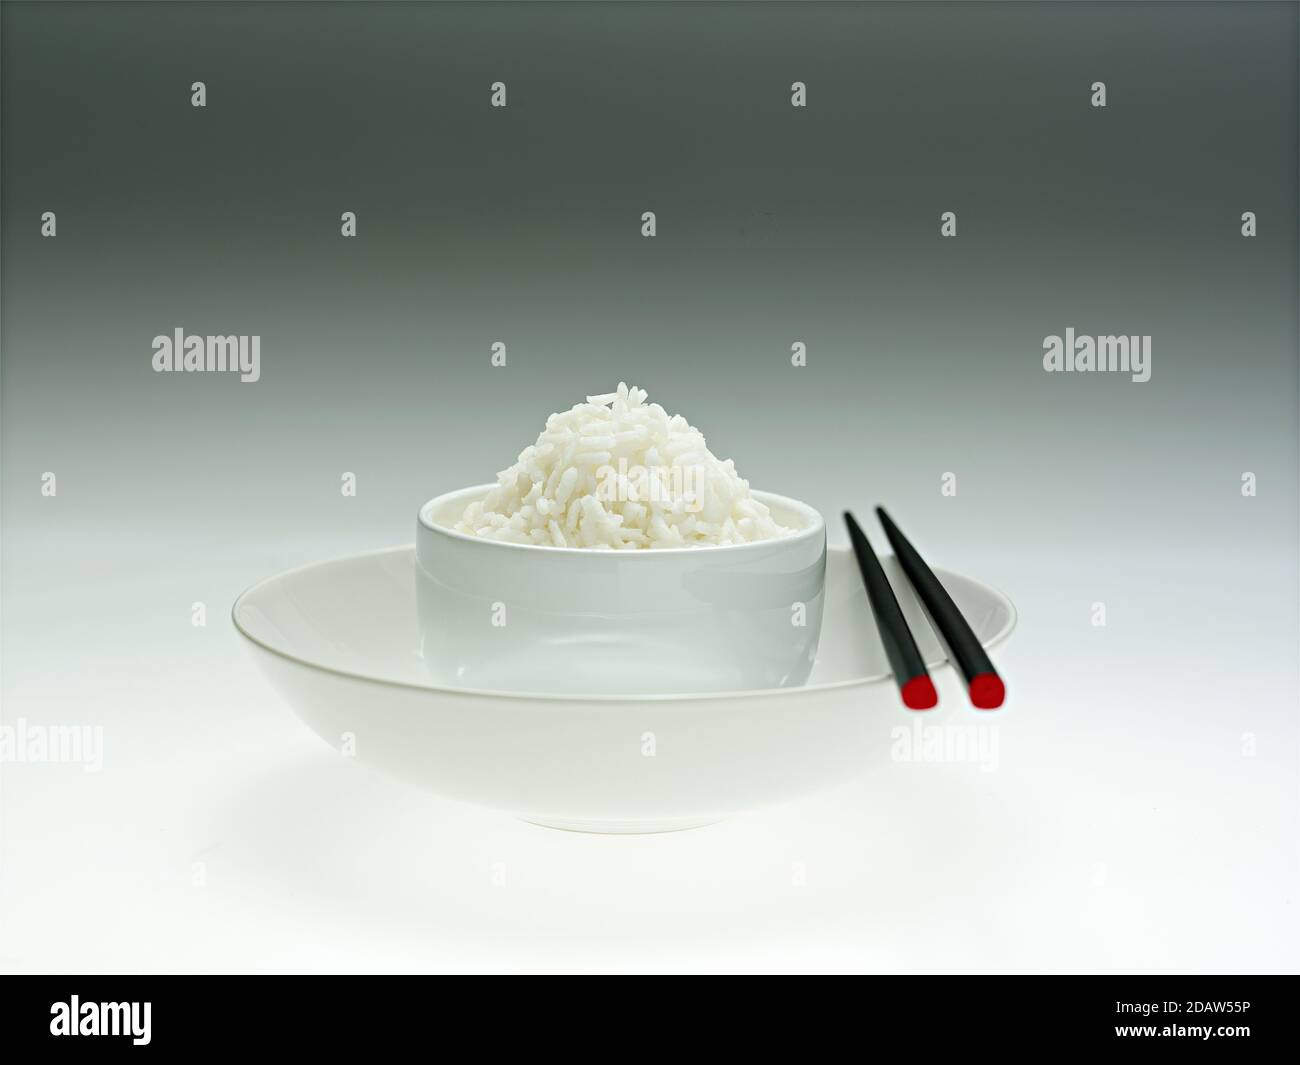 A white bowl on a plate, contains rice, with Chinese sticks, on a soft white background, with shadows. Stock Photo